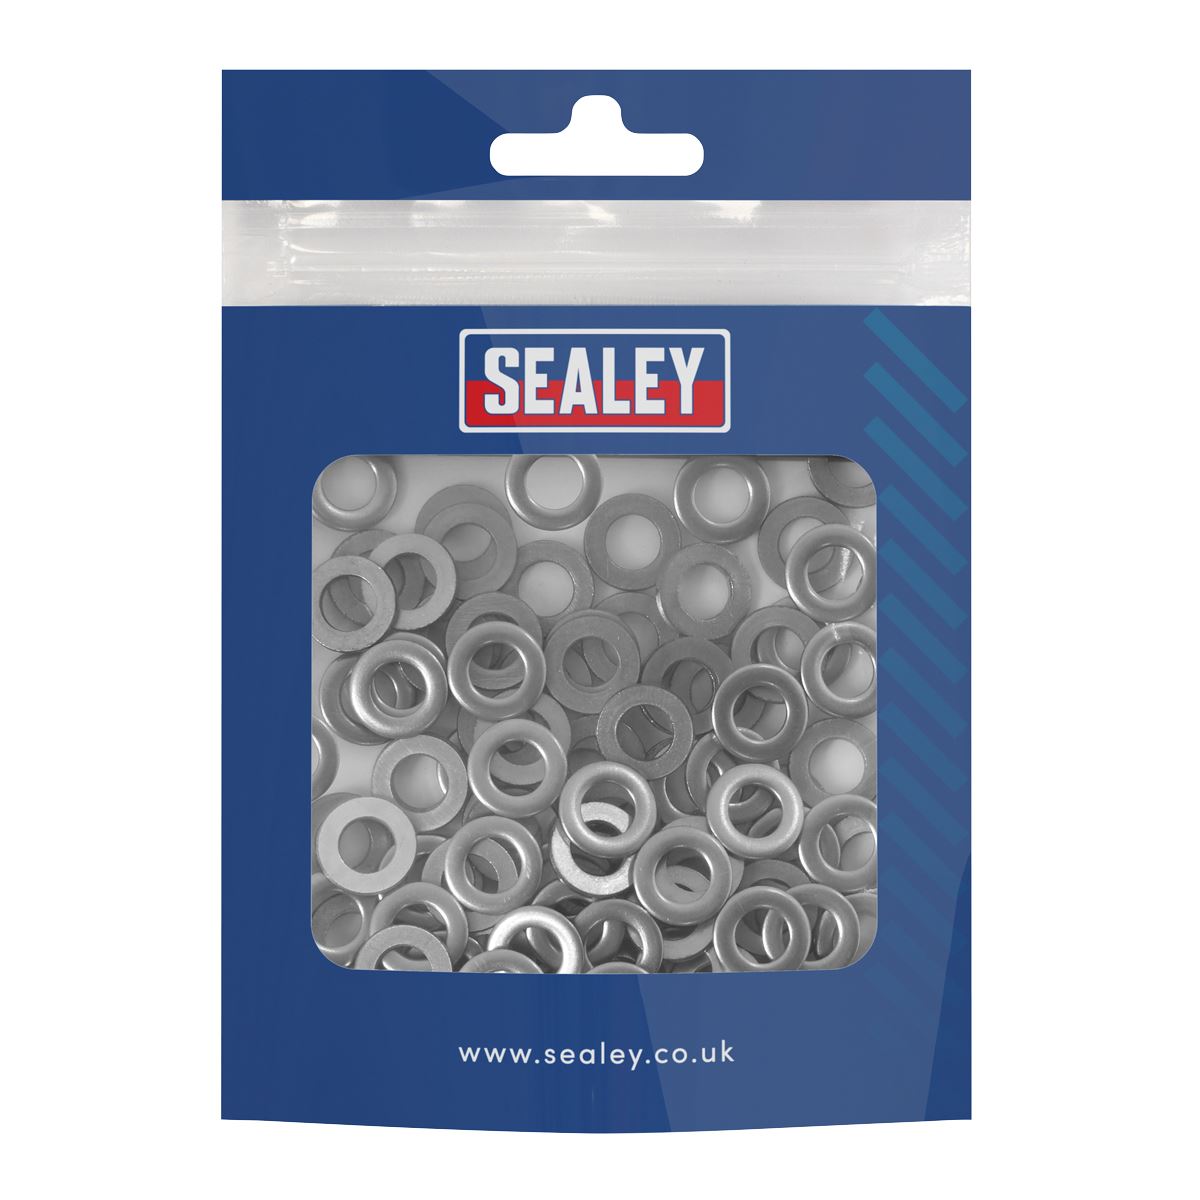 Sealey Stainless Steel Flat Washer Din 125 – M6 - Pack of 100